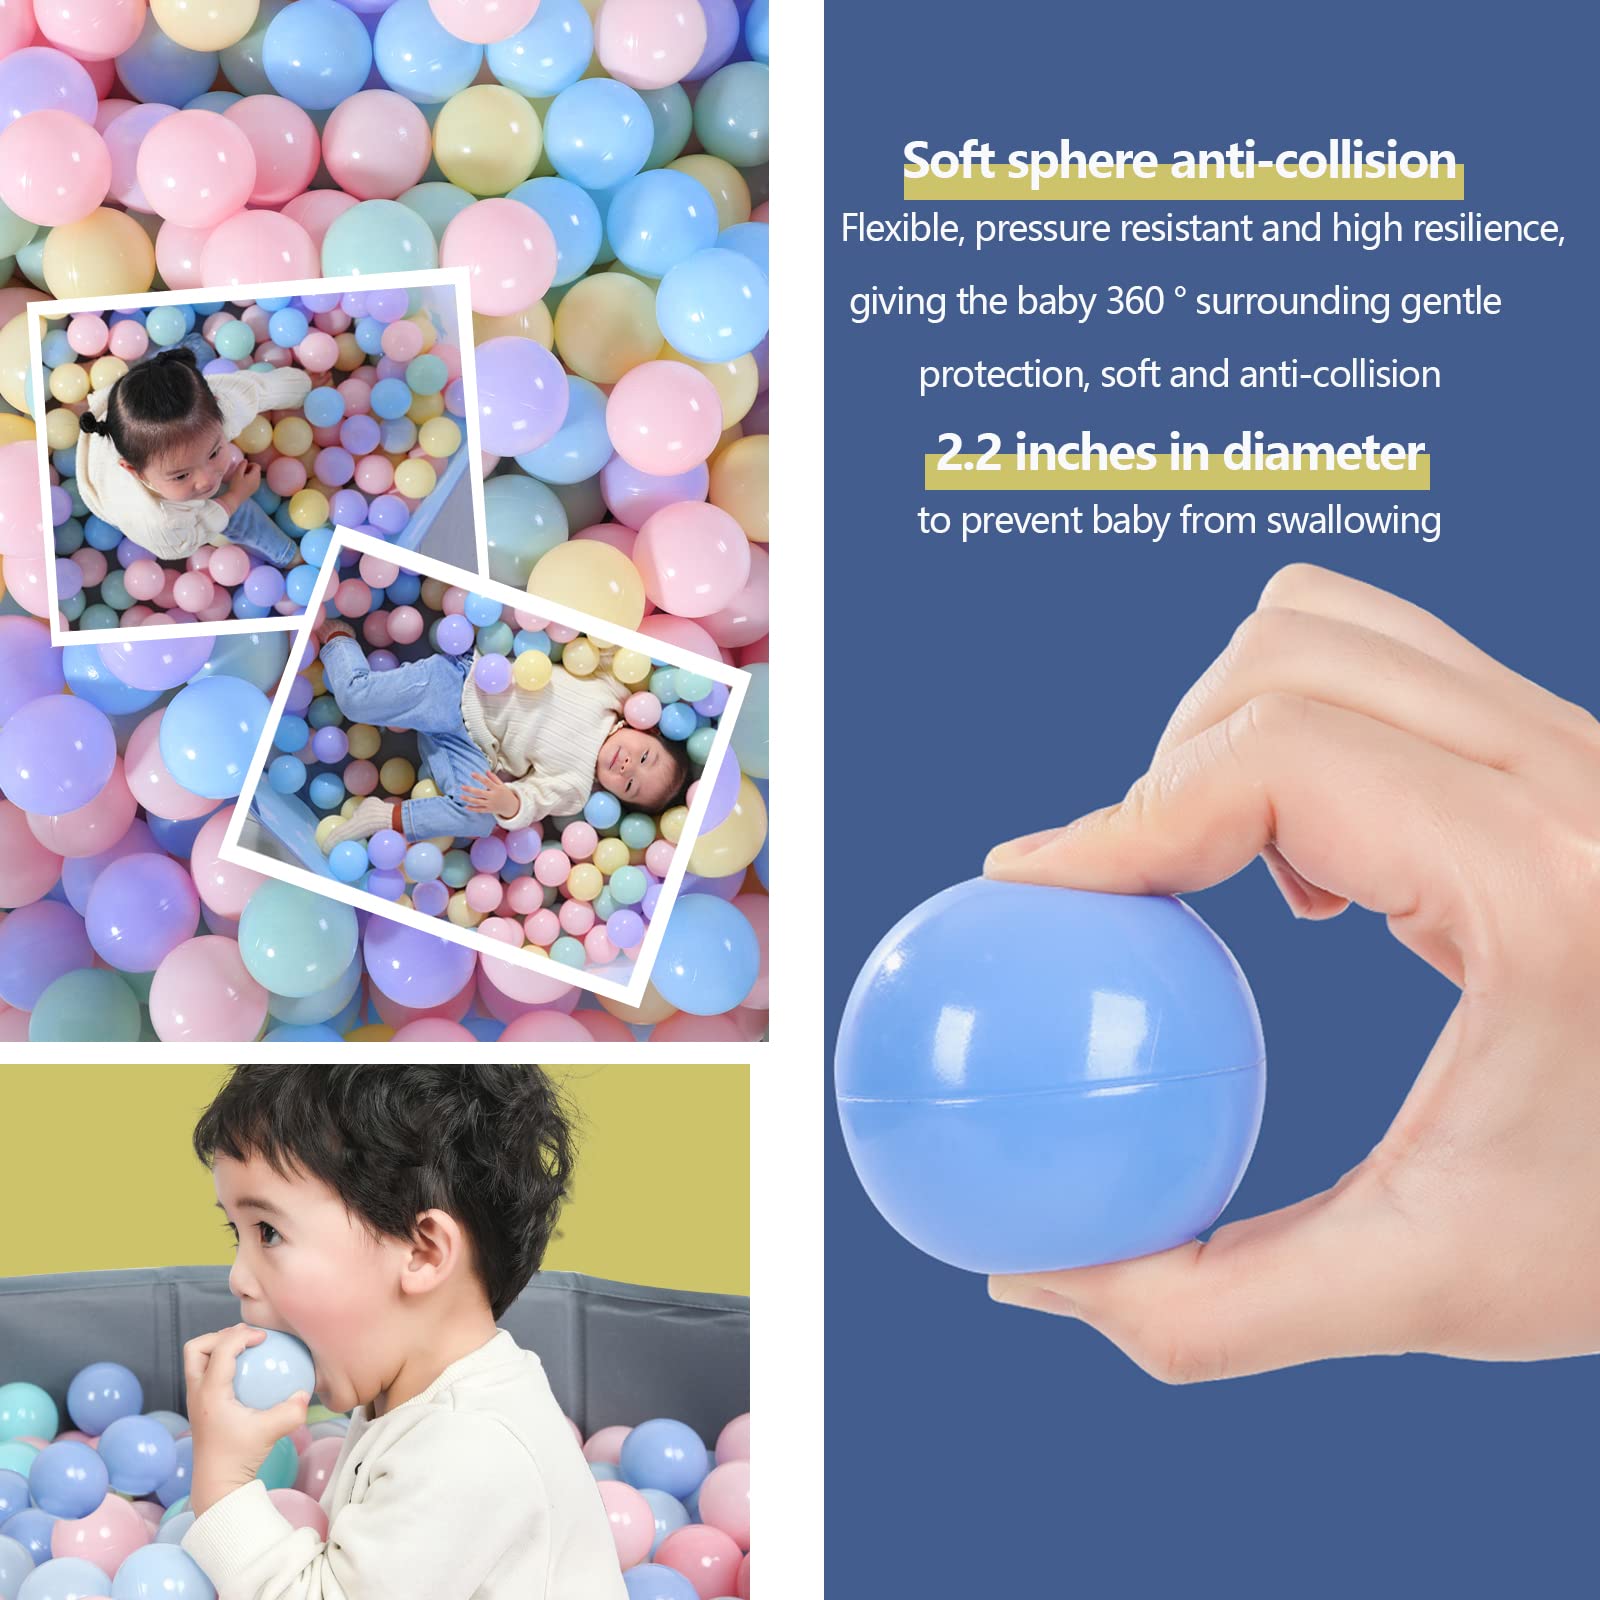 Babies Ball Pit Balls 170 BPA Free Ball Pool Balls for Swim Fun Toys,Non-Toxic Colorful Plastic Play Pit Balls For Baby Ball Pit,Toddlers Kids Birthday Party Decoration Tent Tunnels Pit Balls ( 2.2